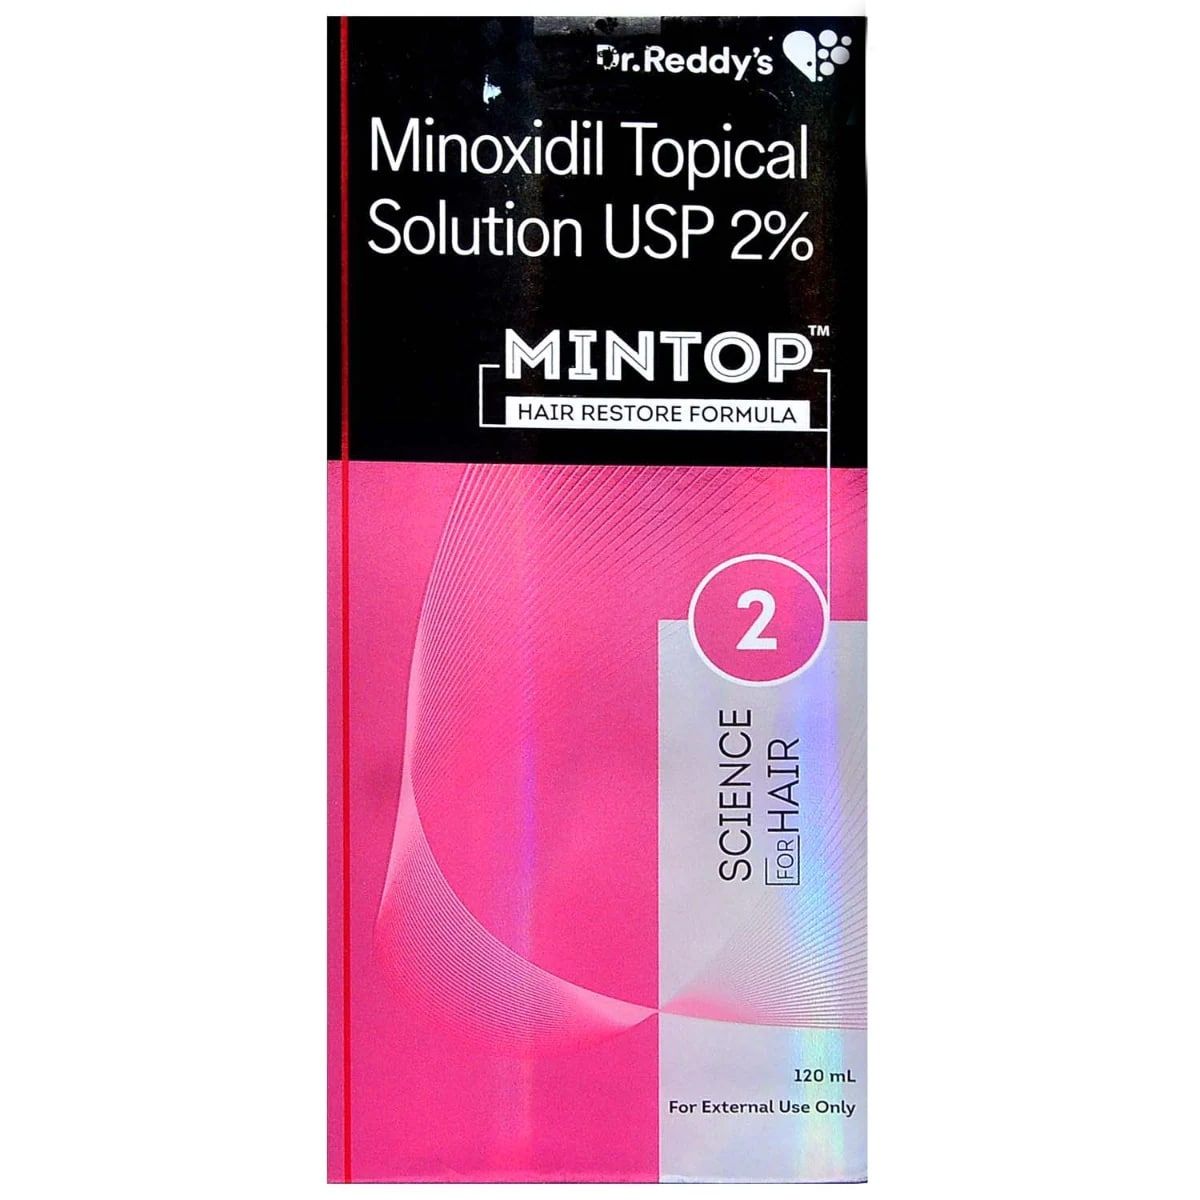 Mintop Forte - Bottle of 60 ml Solution : Amazon.in: Health & Personal Care